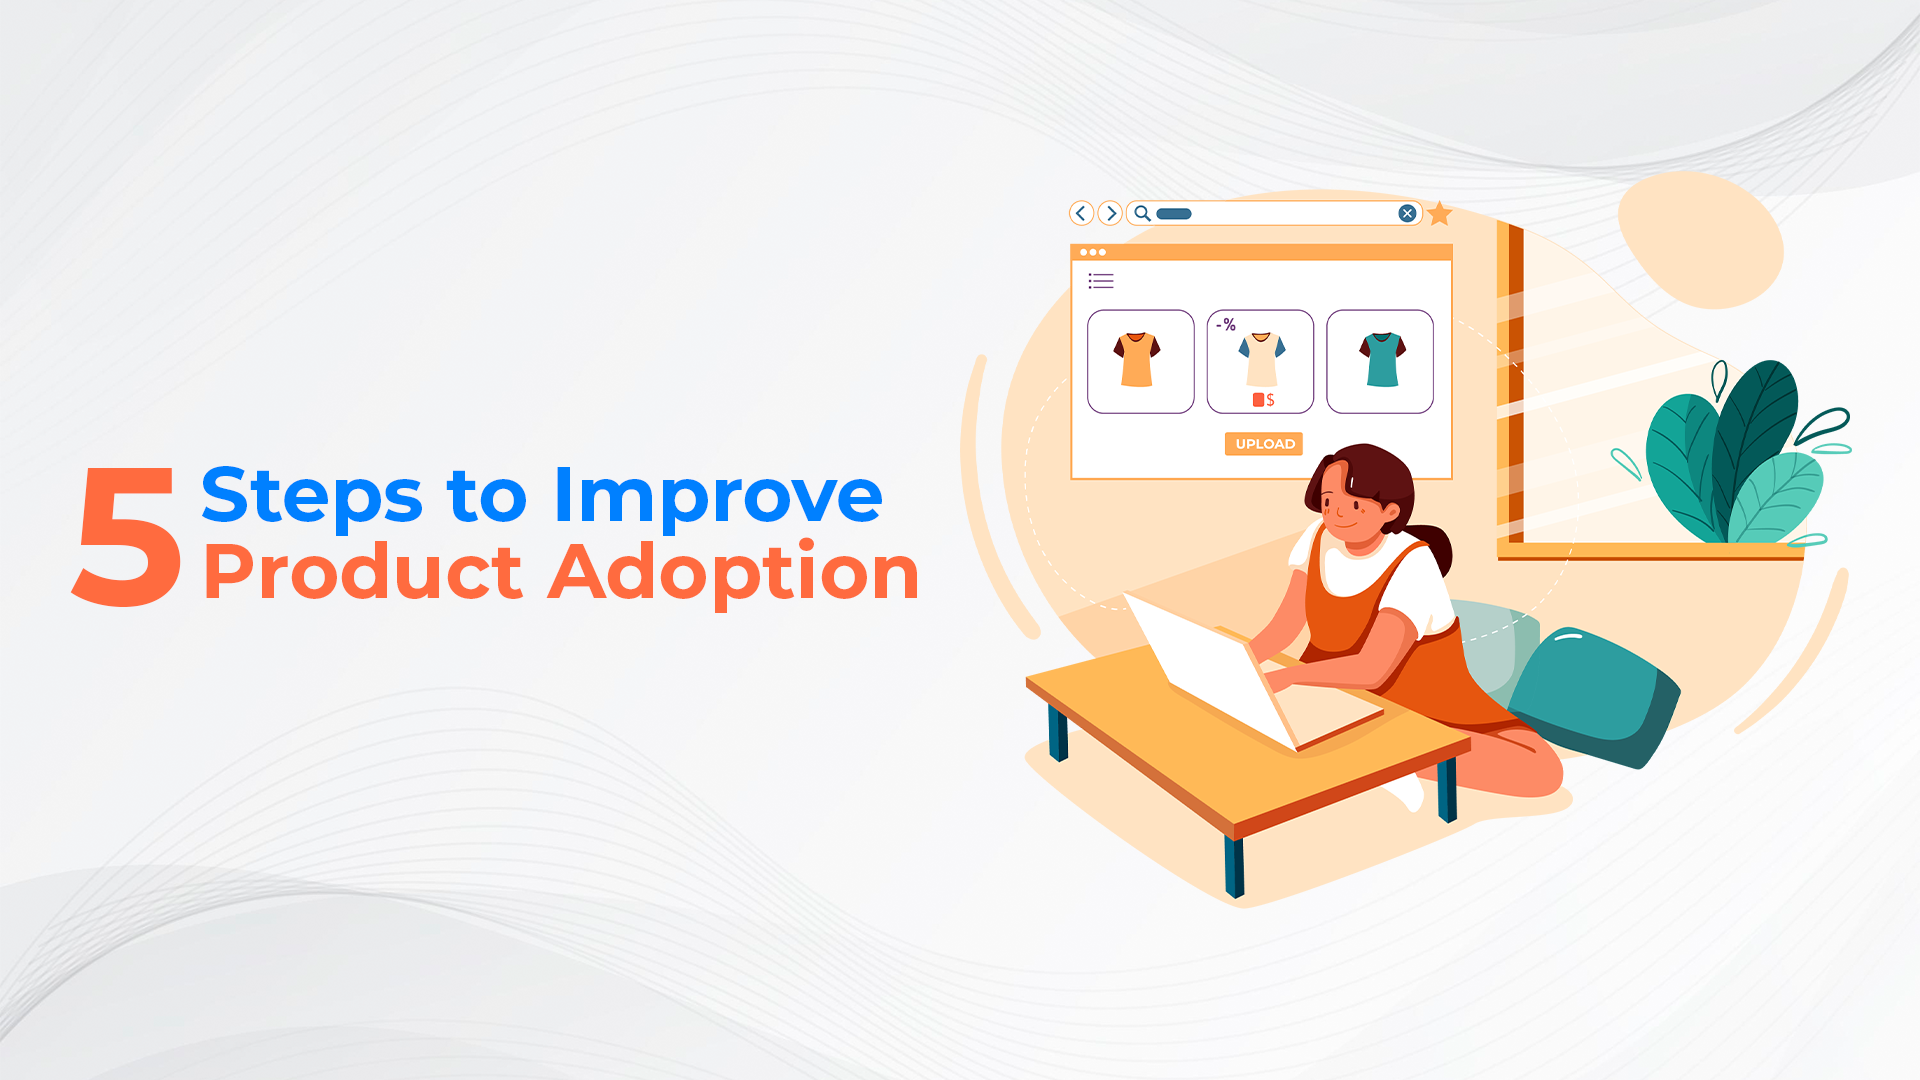 5 Steps to Improve Product Adoption Through Customer Education